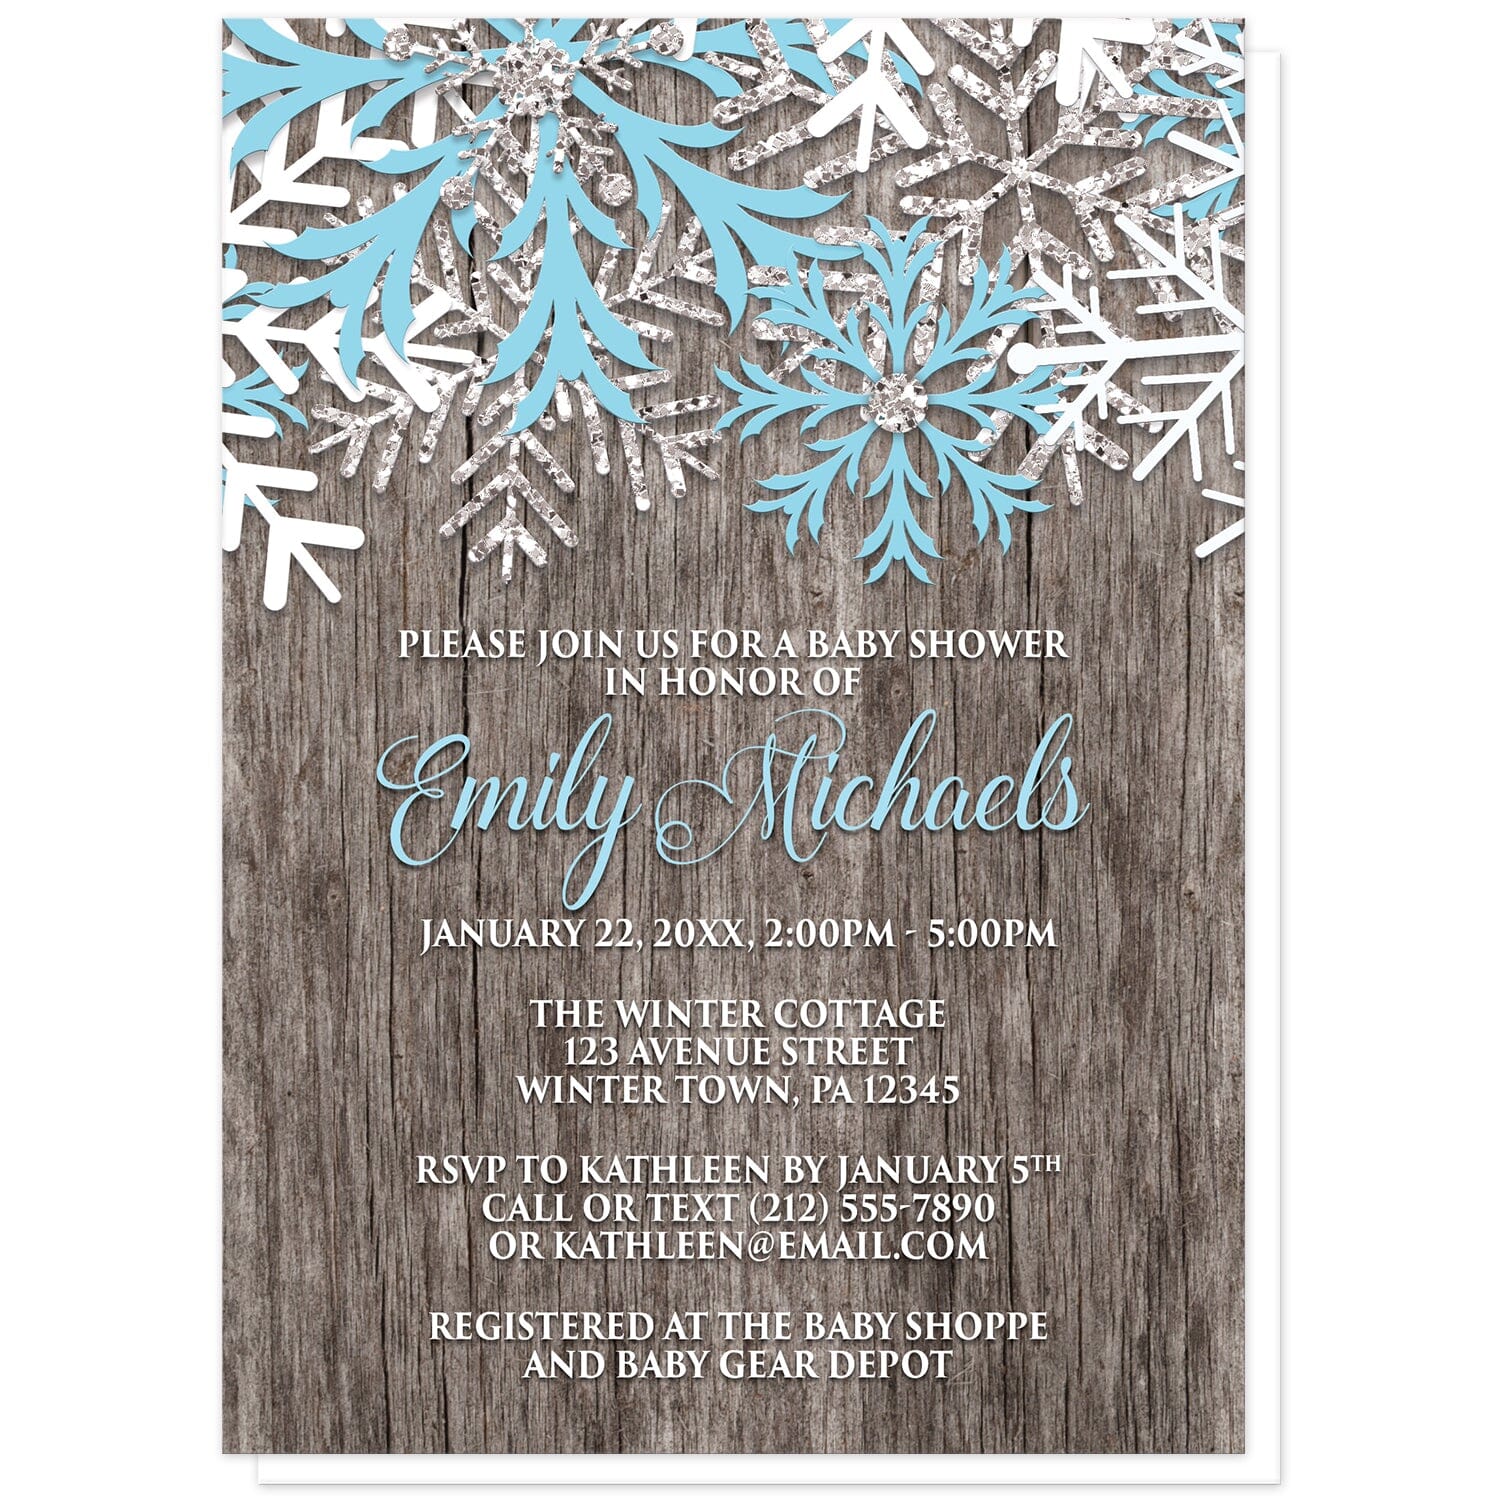 Rustic Winter Wood Blue Snowflake Baby Shower Invitations at Artistically Invited. Country-inspired rustic winter wood blue snowflake baby shower invitations designed with light blue, white, and silver-colored glitter-illustrated snowflakes along the top over a rustic wood pattern illustration. Your personalized baby shower celebration details are custom printed in light blue and white over the wood background below the snowflakes.